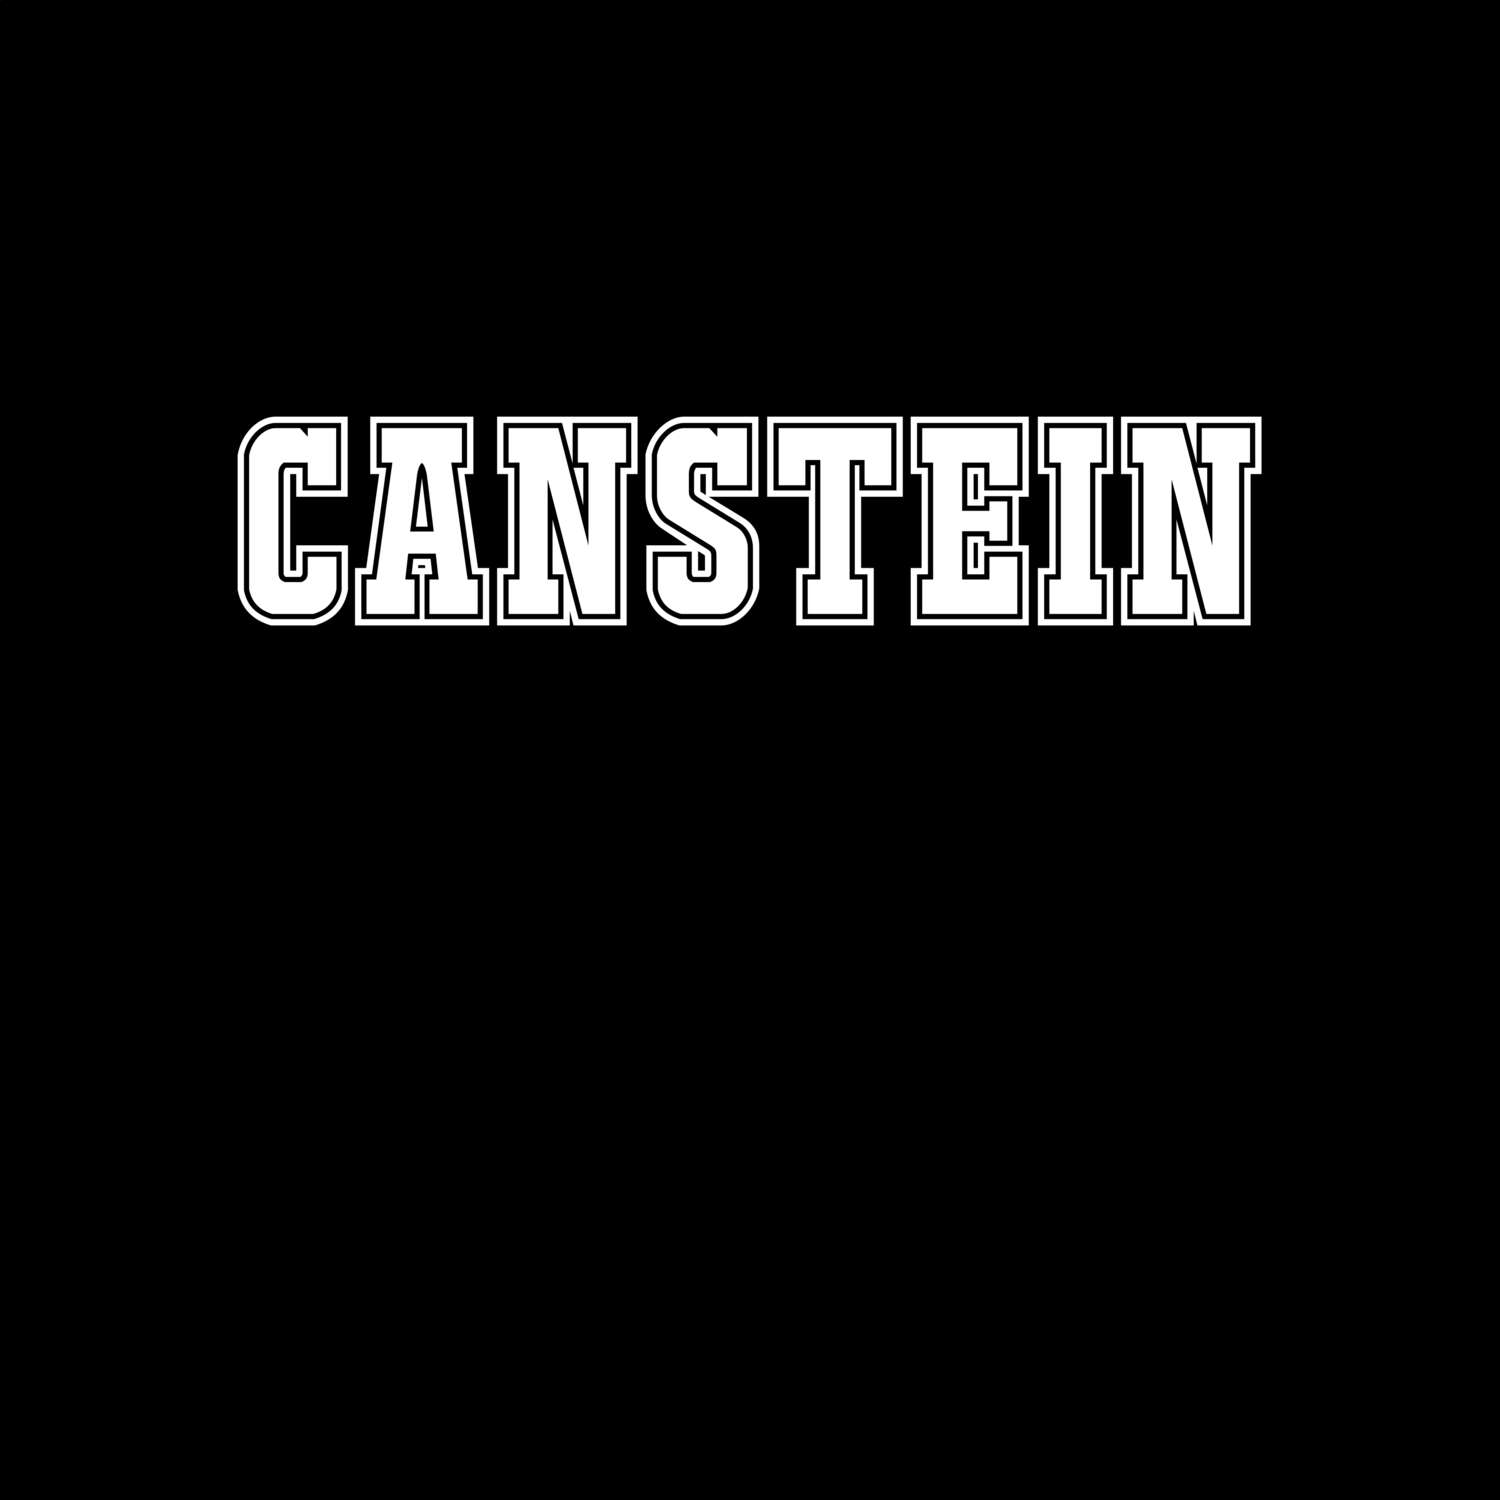 Canstein T-Shirt »Classic«